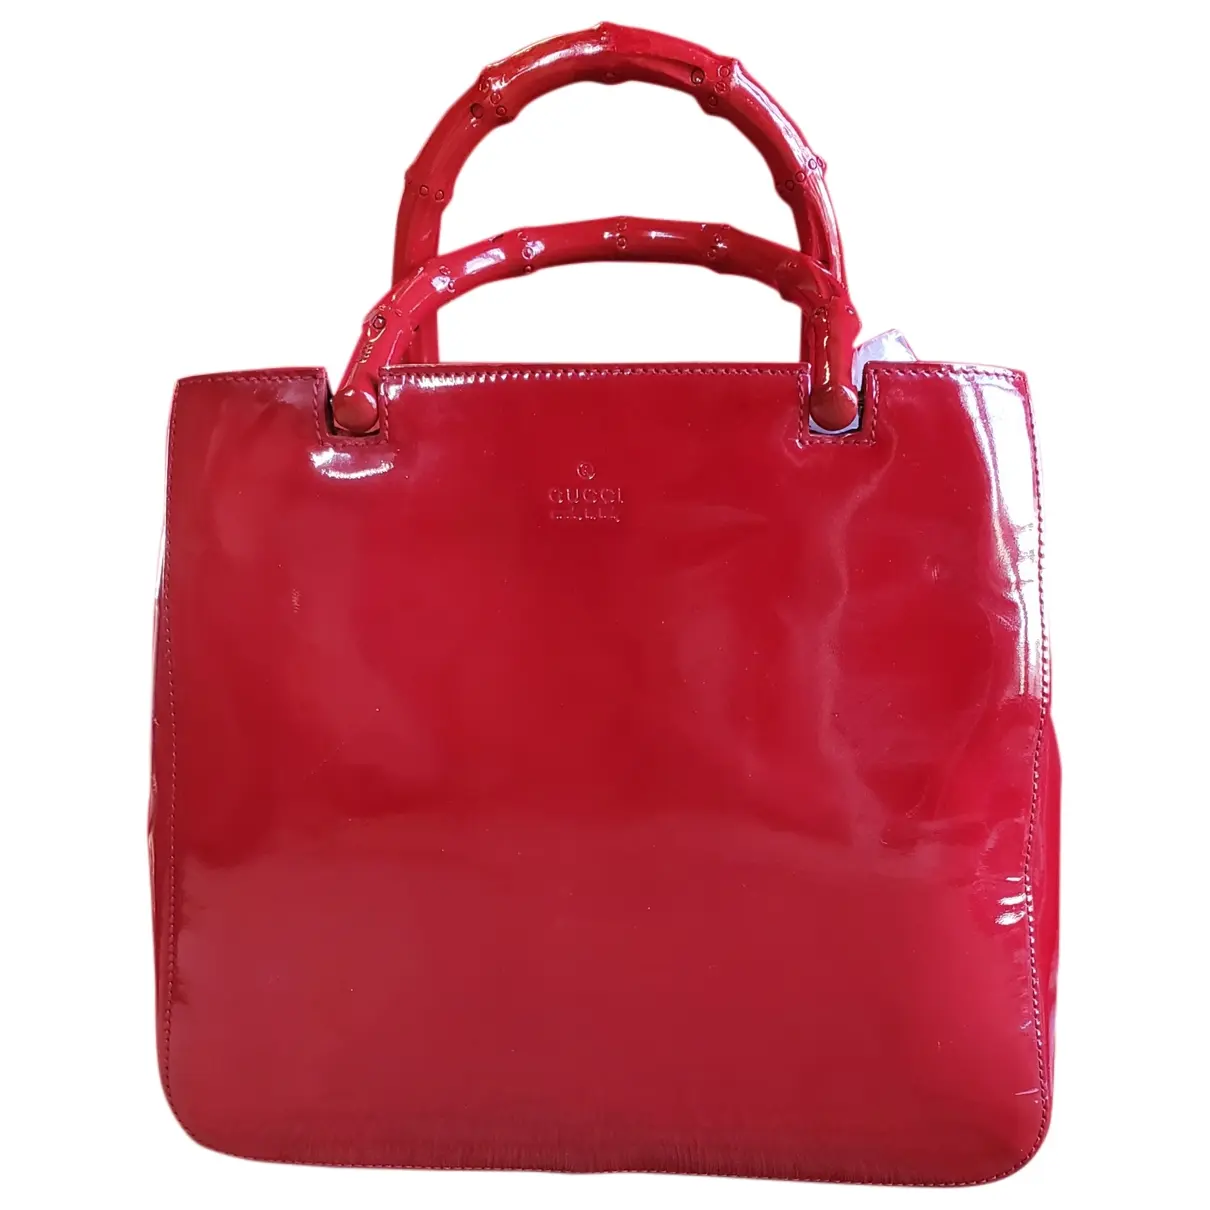 Bamboo patent leather tote Gucci - Vintage